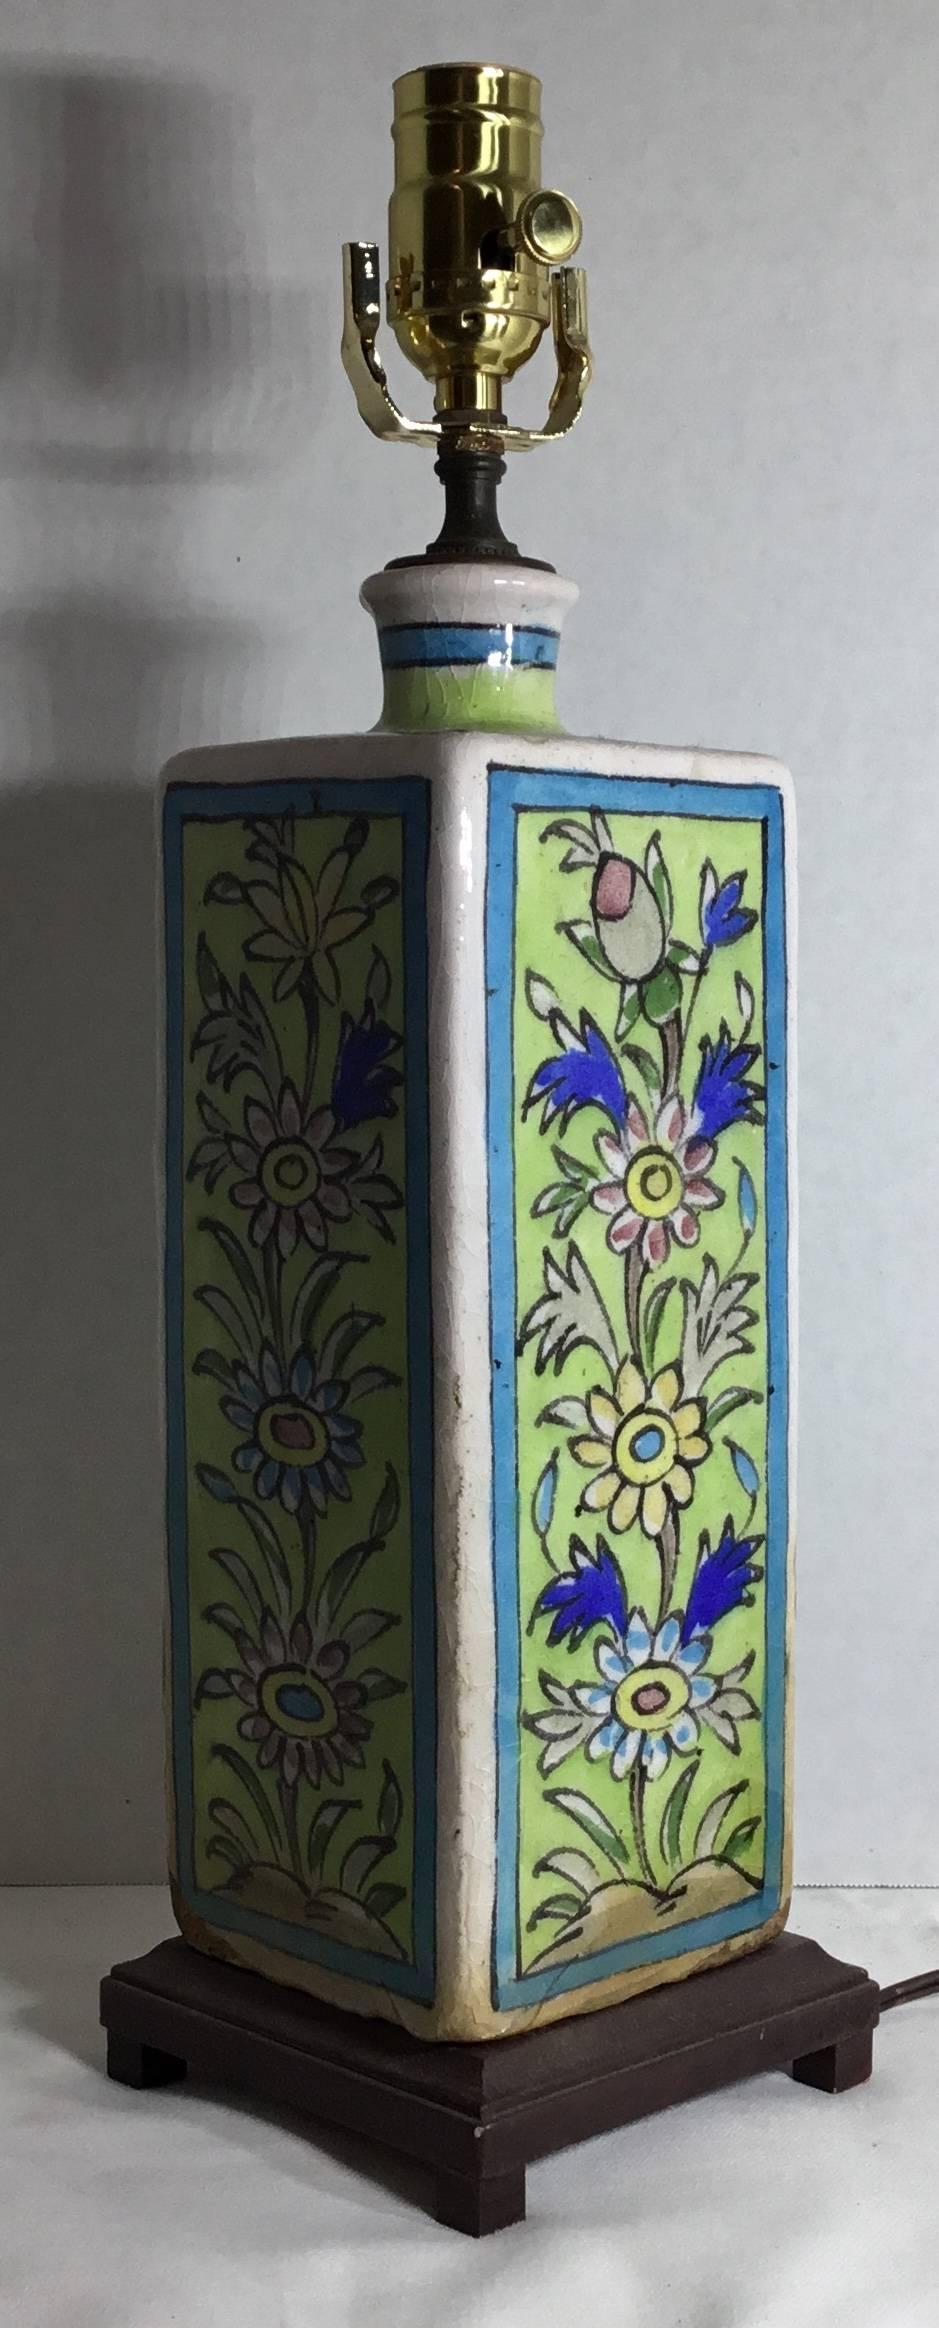 Beautiful table lamp in square shape made of ceramic, hand-painted and glazed with colorful flowers and vine motifs mounted on decorative wood base, electrified with one light ready to use. The ceramic has some missing top layers due to process of